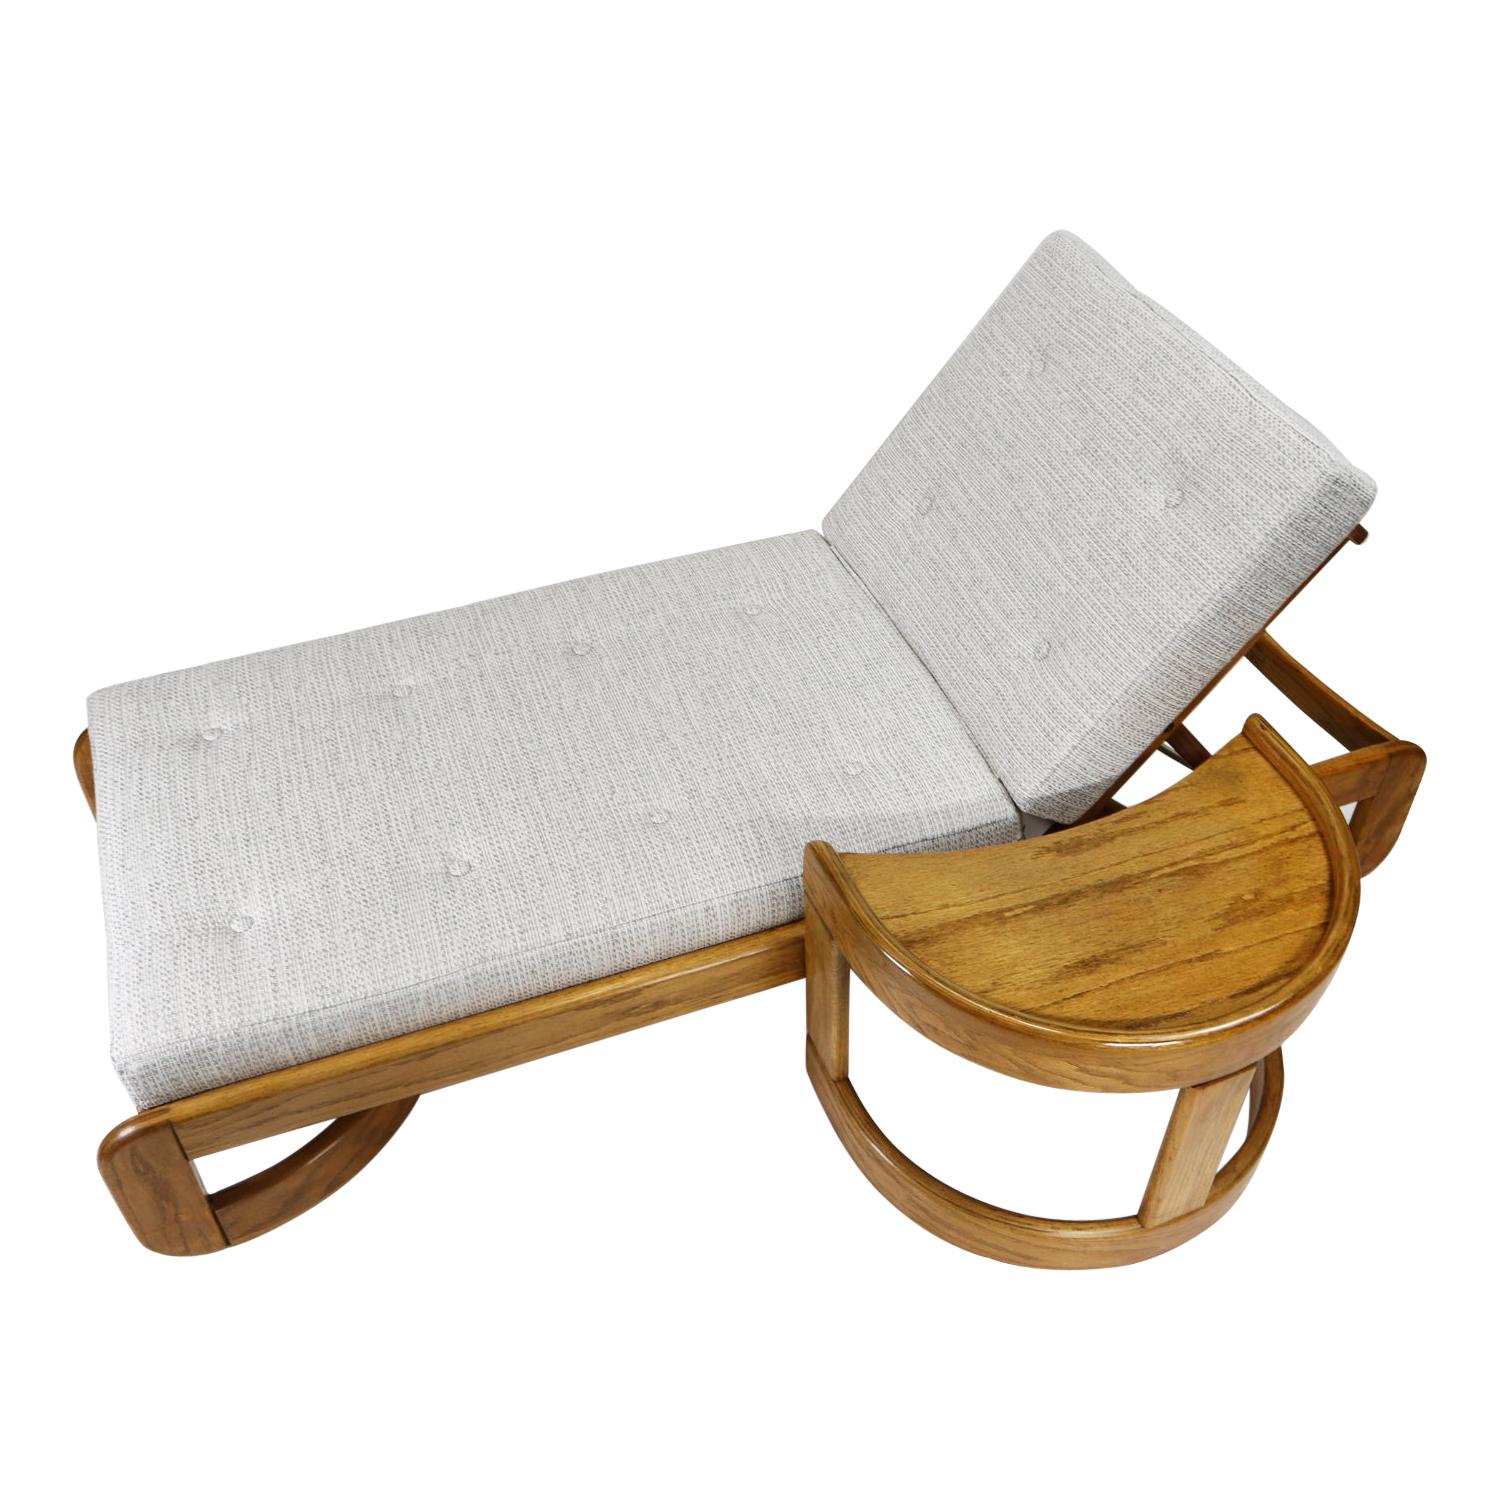 Incredibly versatile indoor chaise lounge by Howard Furniture. We’ve had a few pieces from Howard in the past, and they have always been hits! This particular line by Howard is crafted solid oak. This is the old growth, greatest generation, stuff